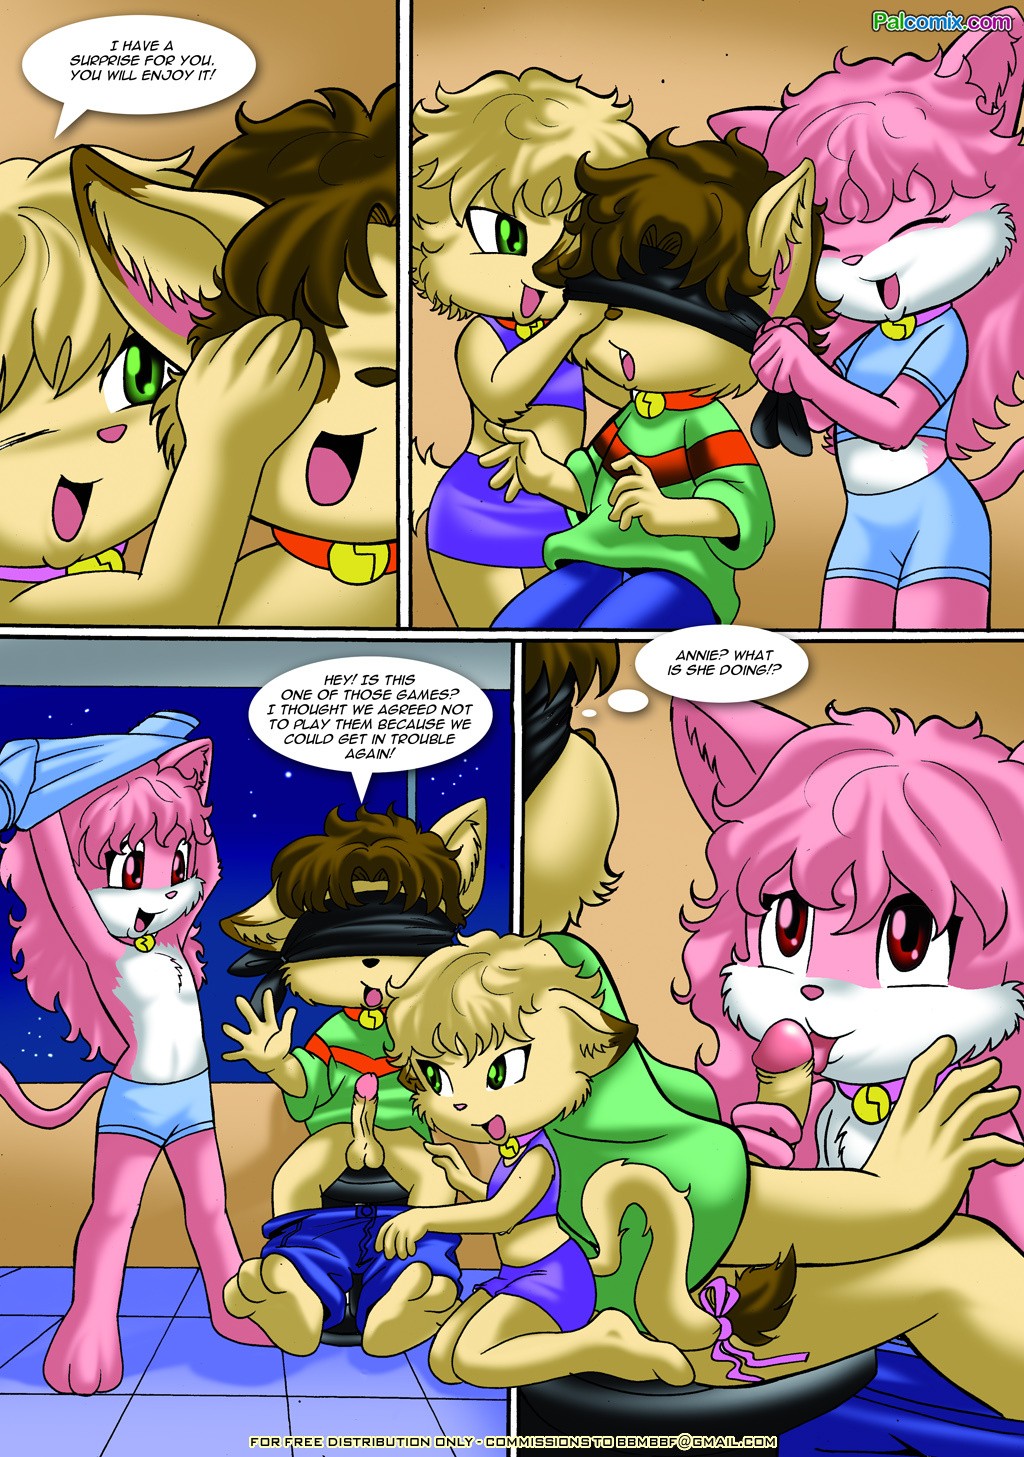 Those Good Old Games - Chapter 2 - Here Comes April porn comic picture 4